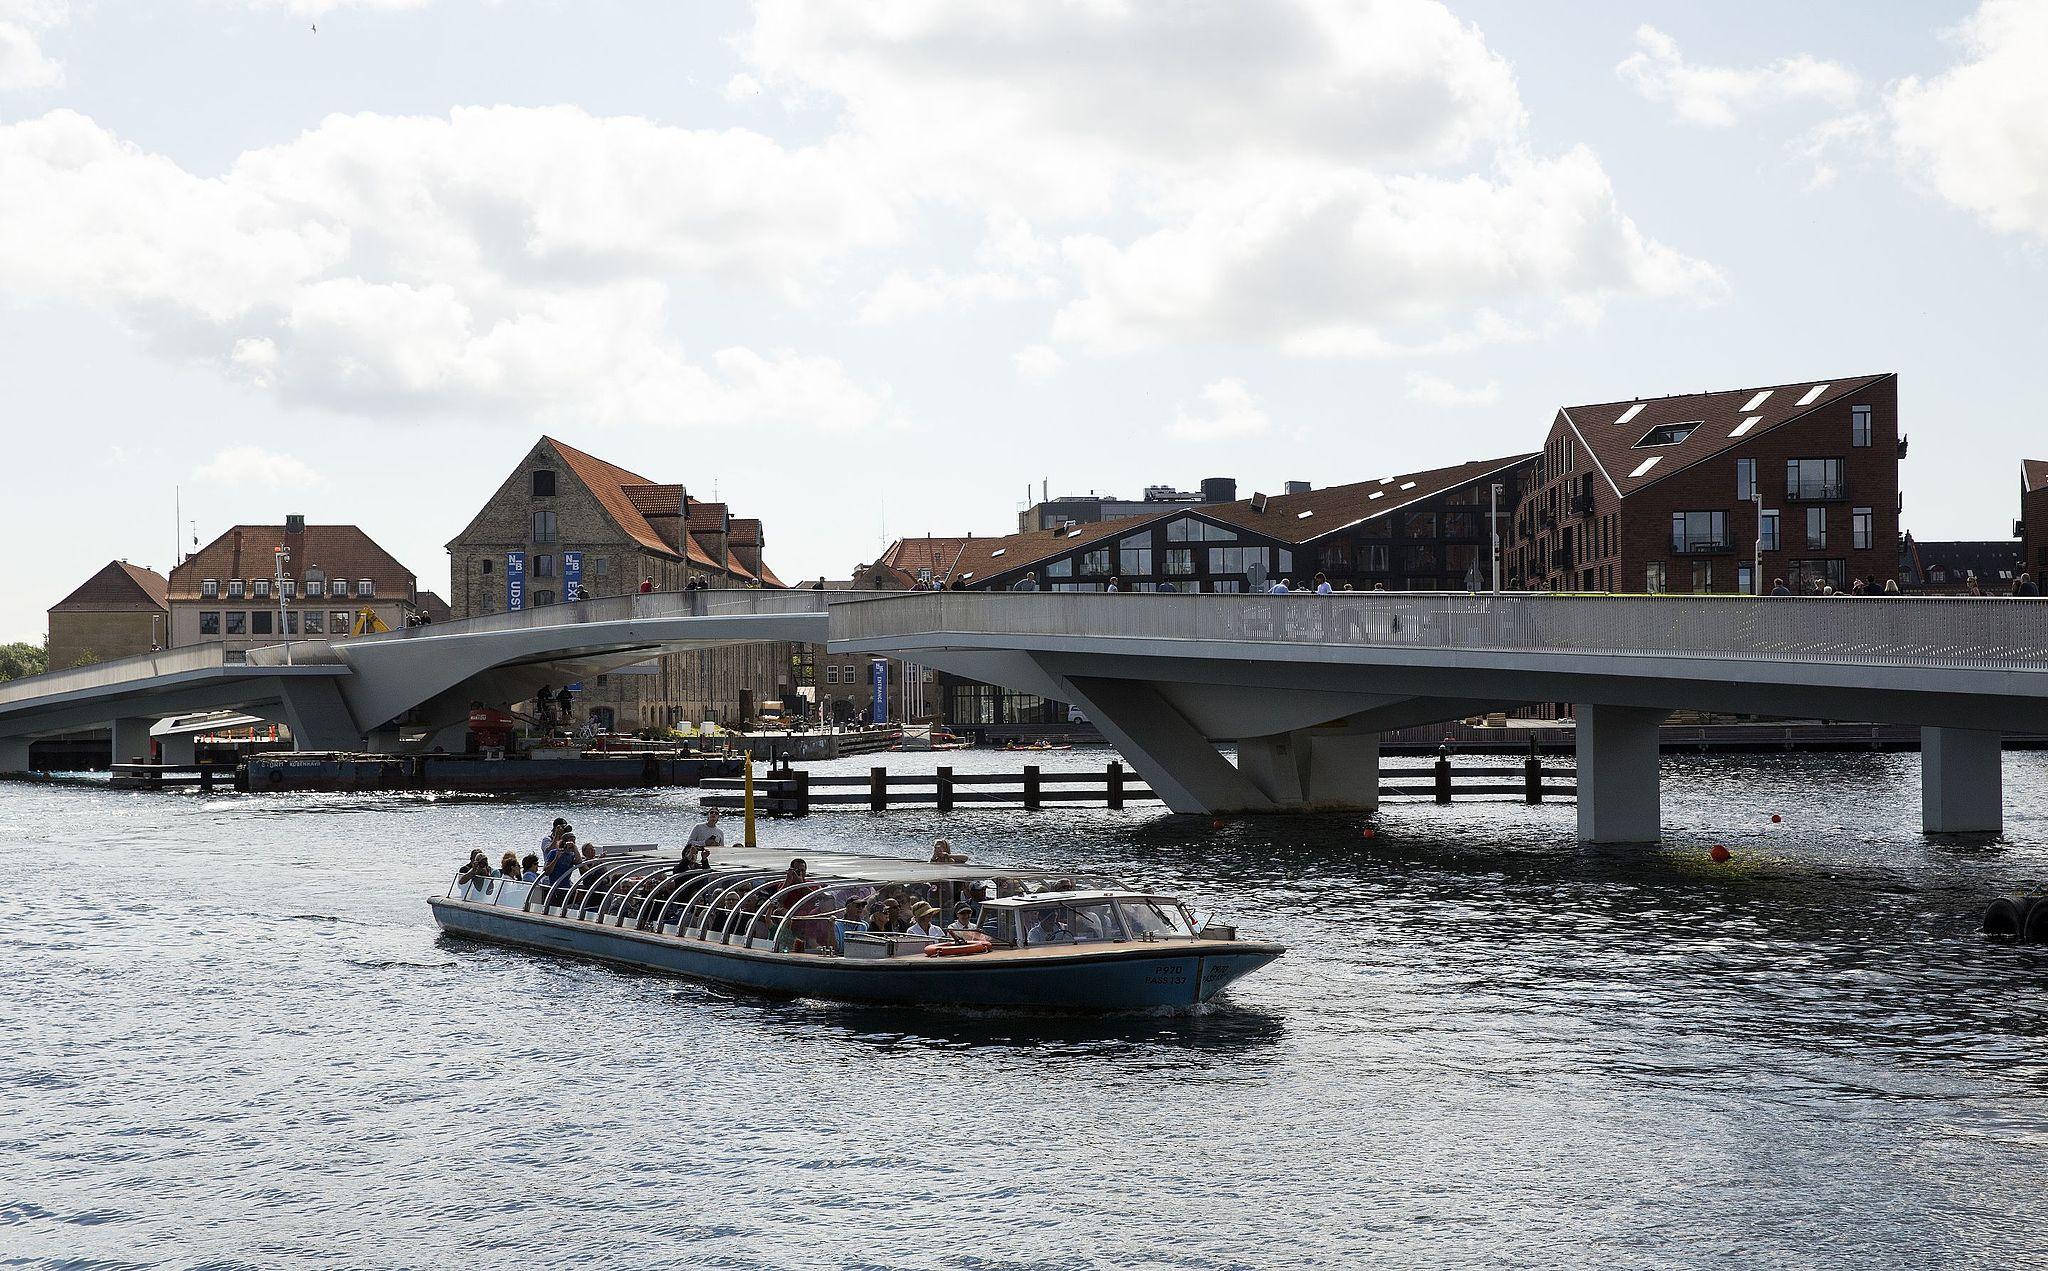 The new Inderhavnsbroen bridge is known locally as 'the kissing bridge'